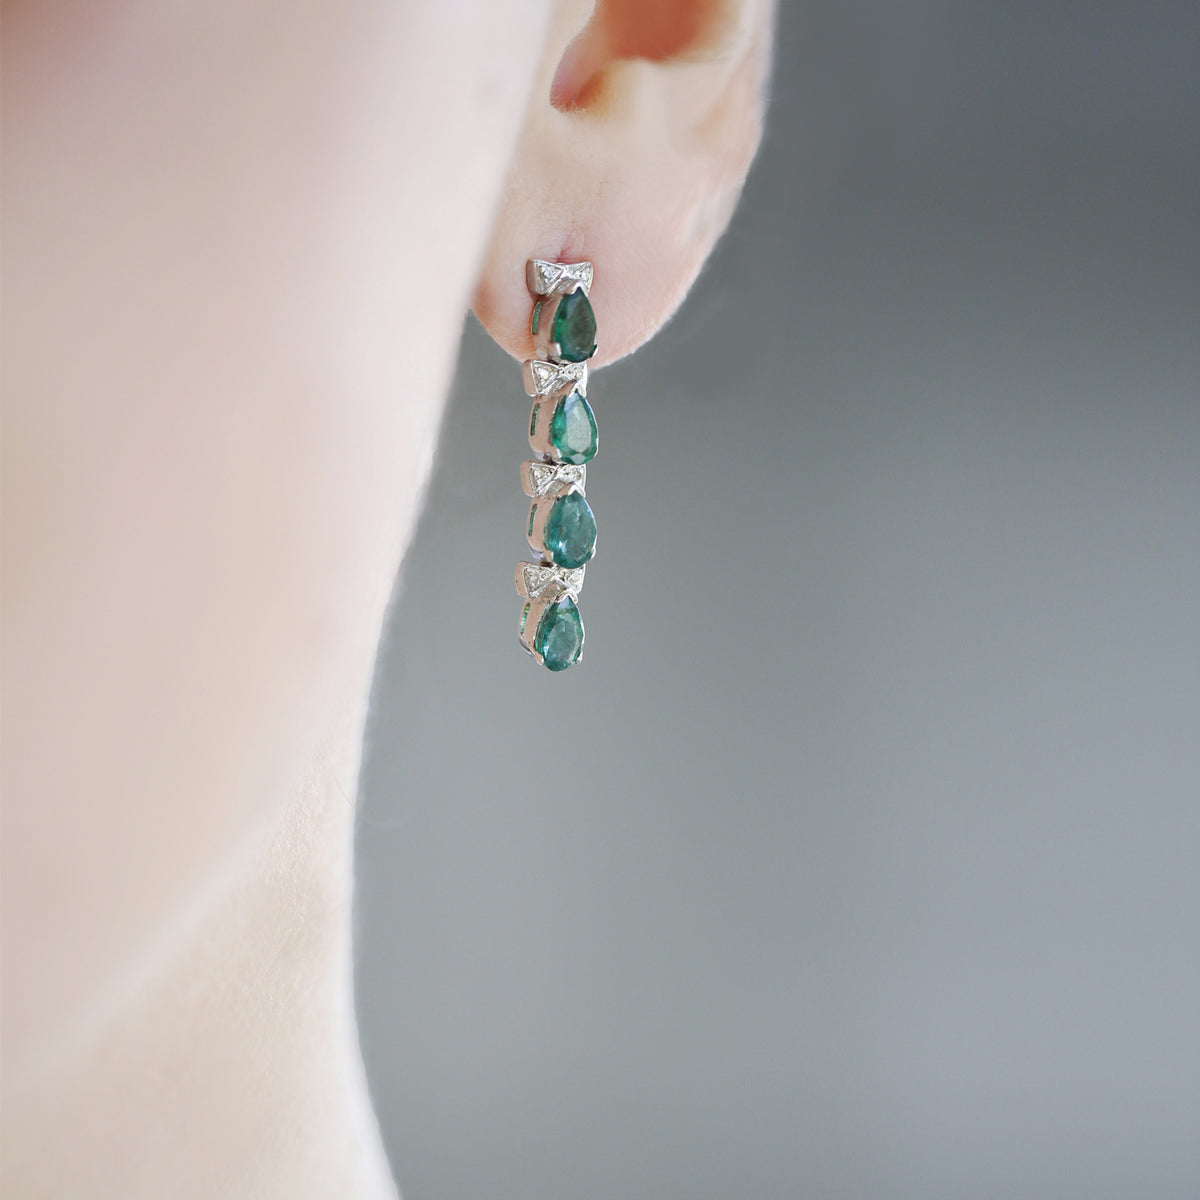 Silver Earrings with Emerald and Diamond Bow